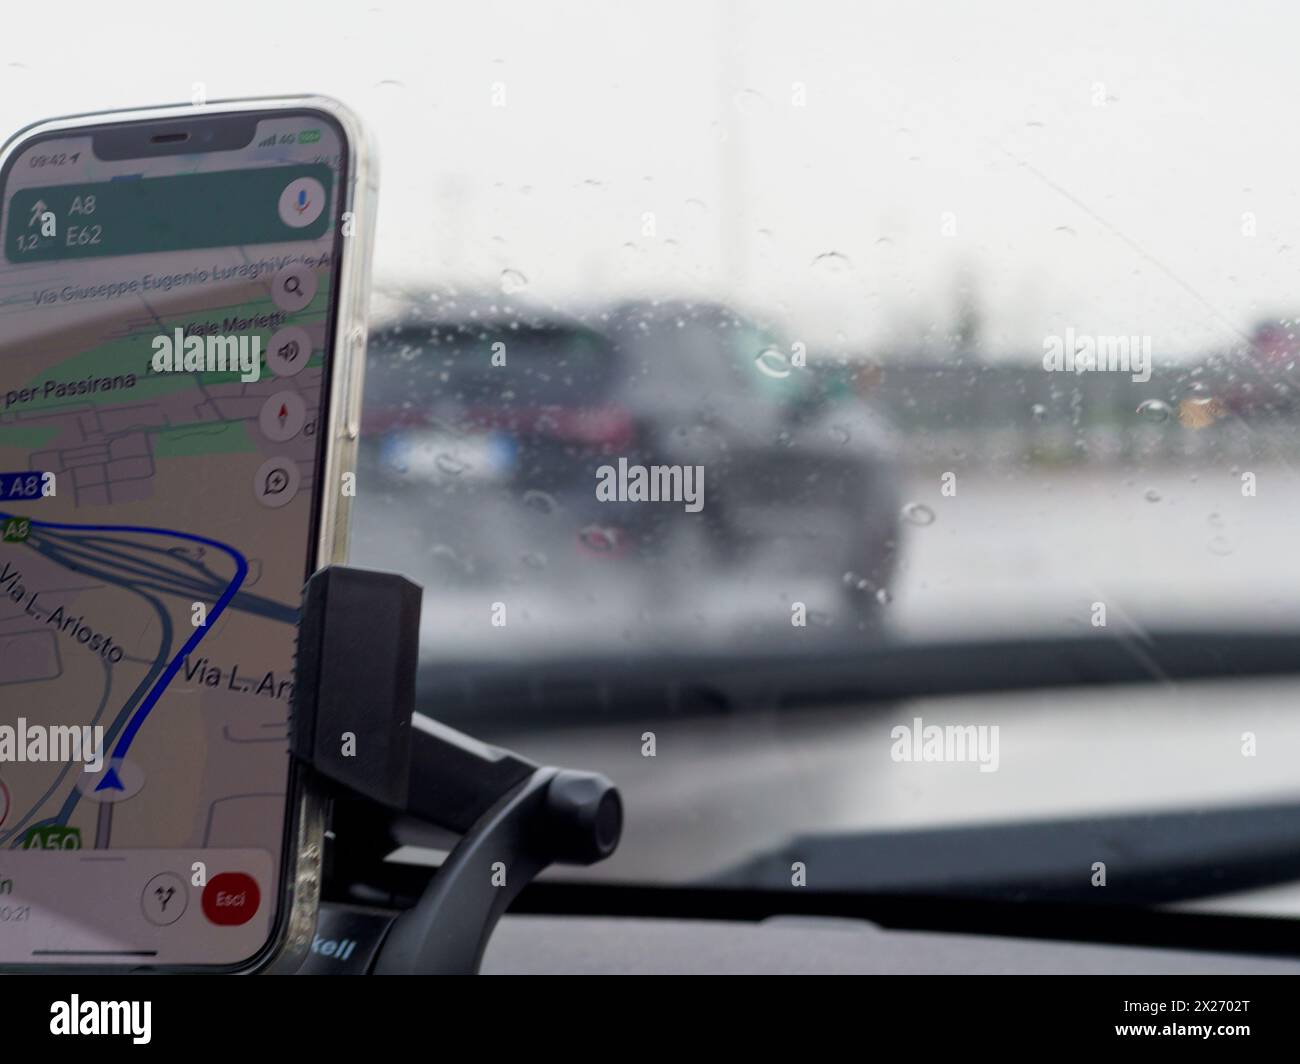 Milan, Italy - April 26th 2023 View from inside a car with a smartphone navigation setup driving Stock Photo